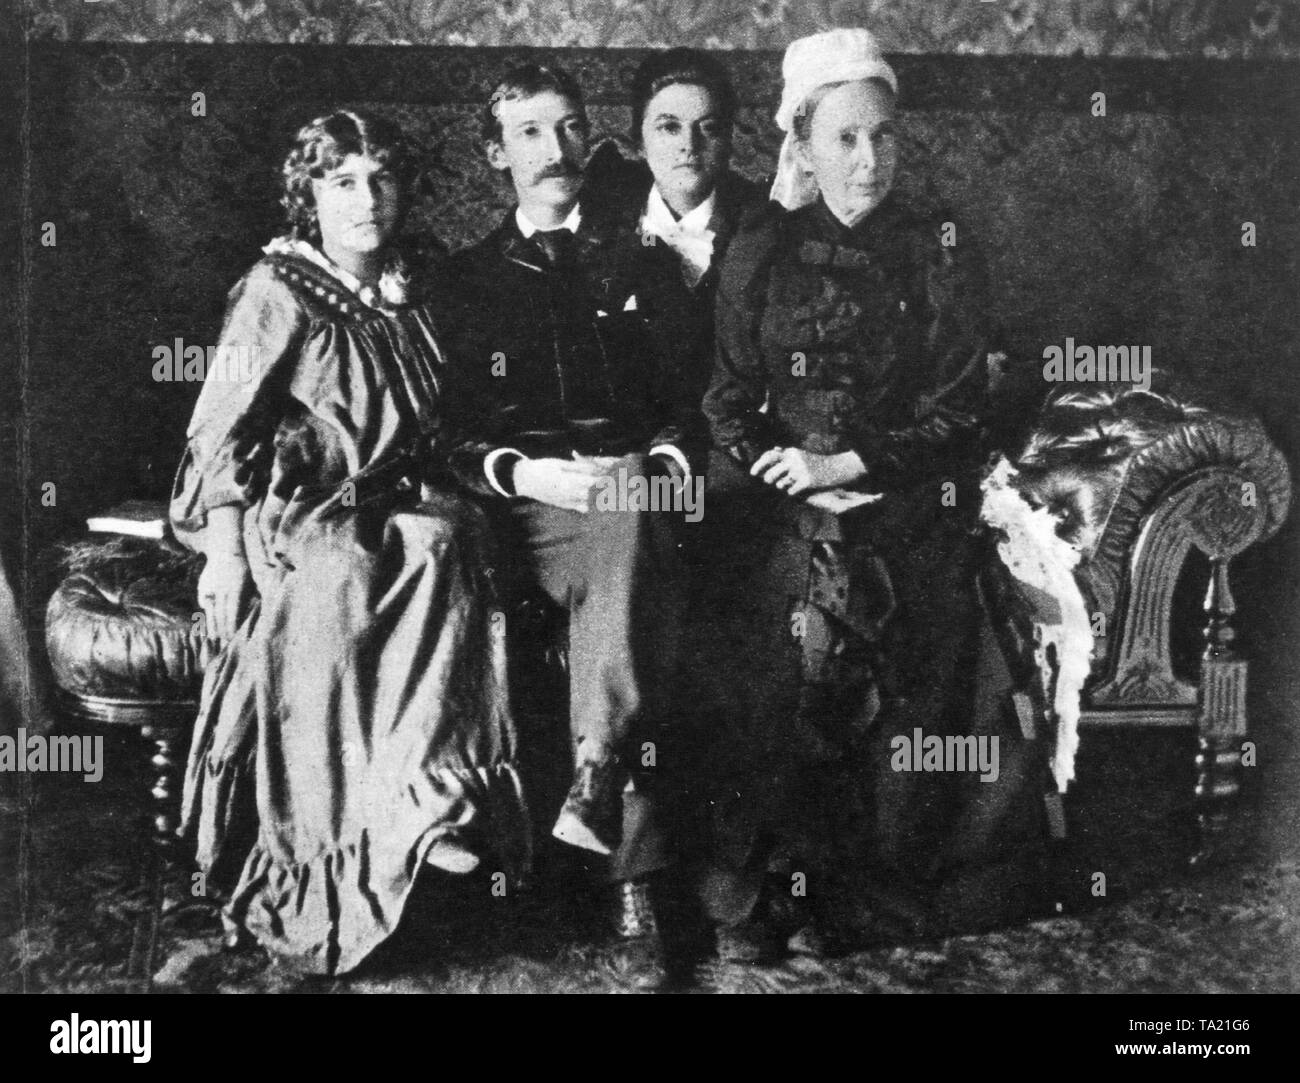 The Scottish author Robert Louis Stevenson during a visit to Sydney, Australia with his step-daughter, Mrs. Strong, his wife Fanny Stevenson and his mother (from left). Stock Photo